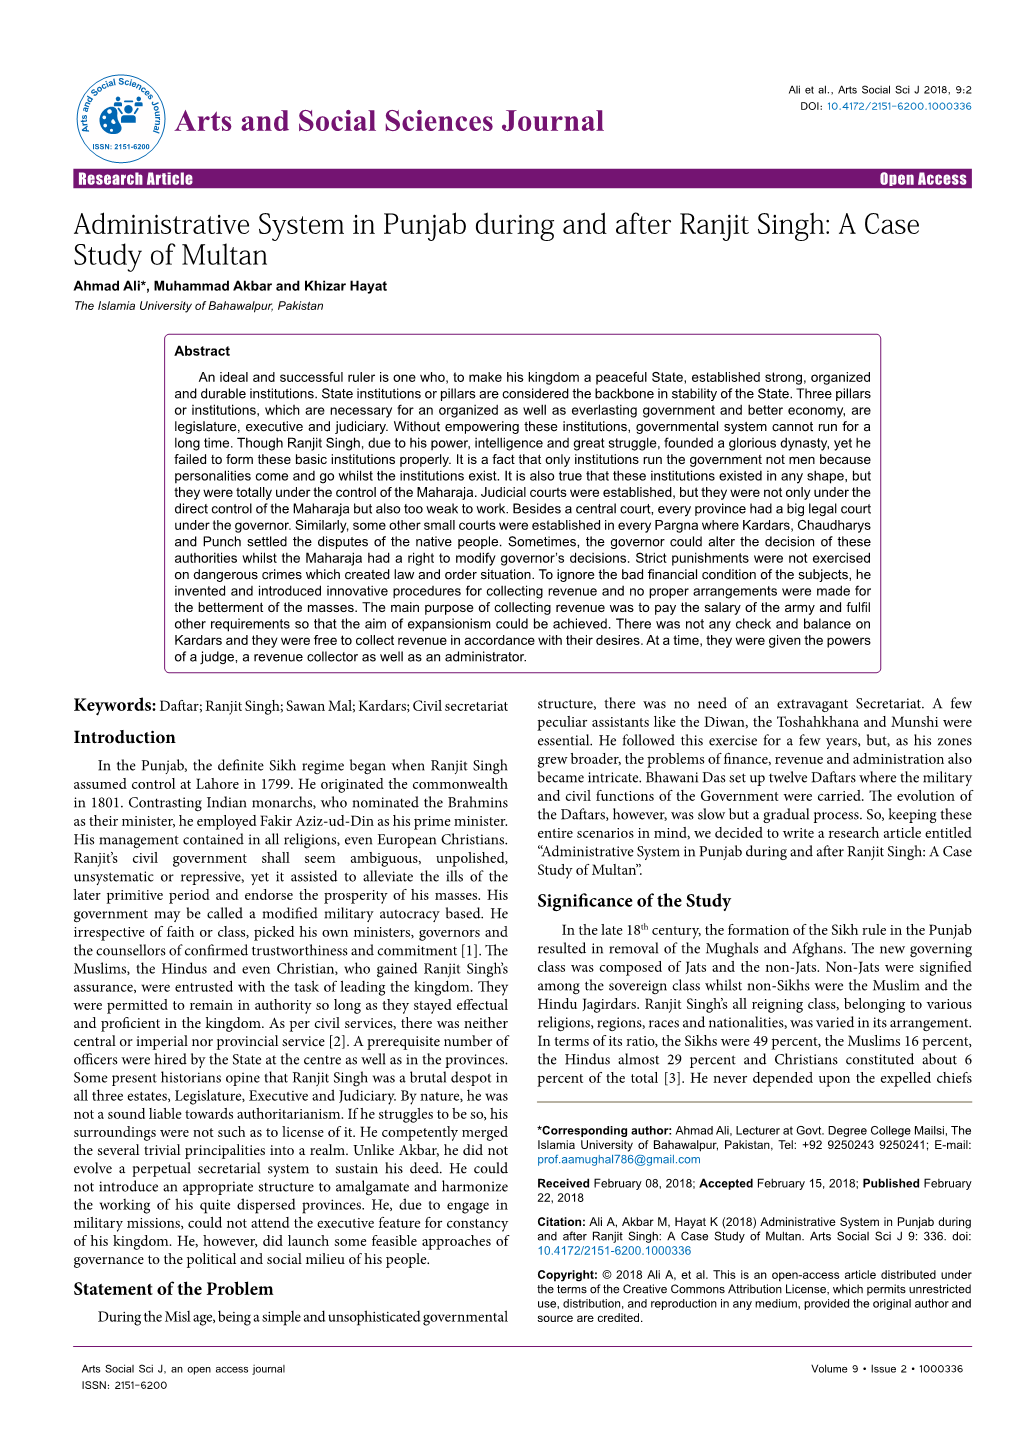 Administrative System in Punjab During and After Ranjit Singh: A